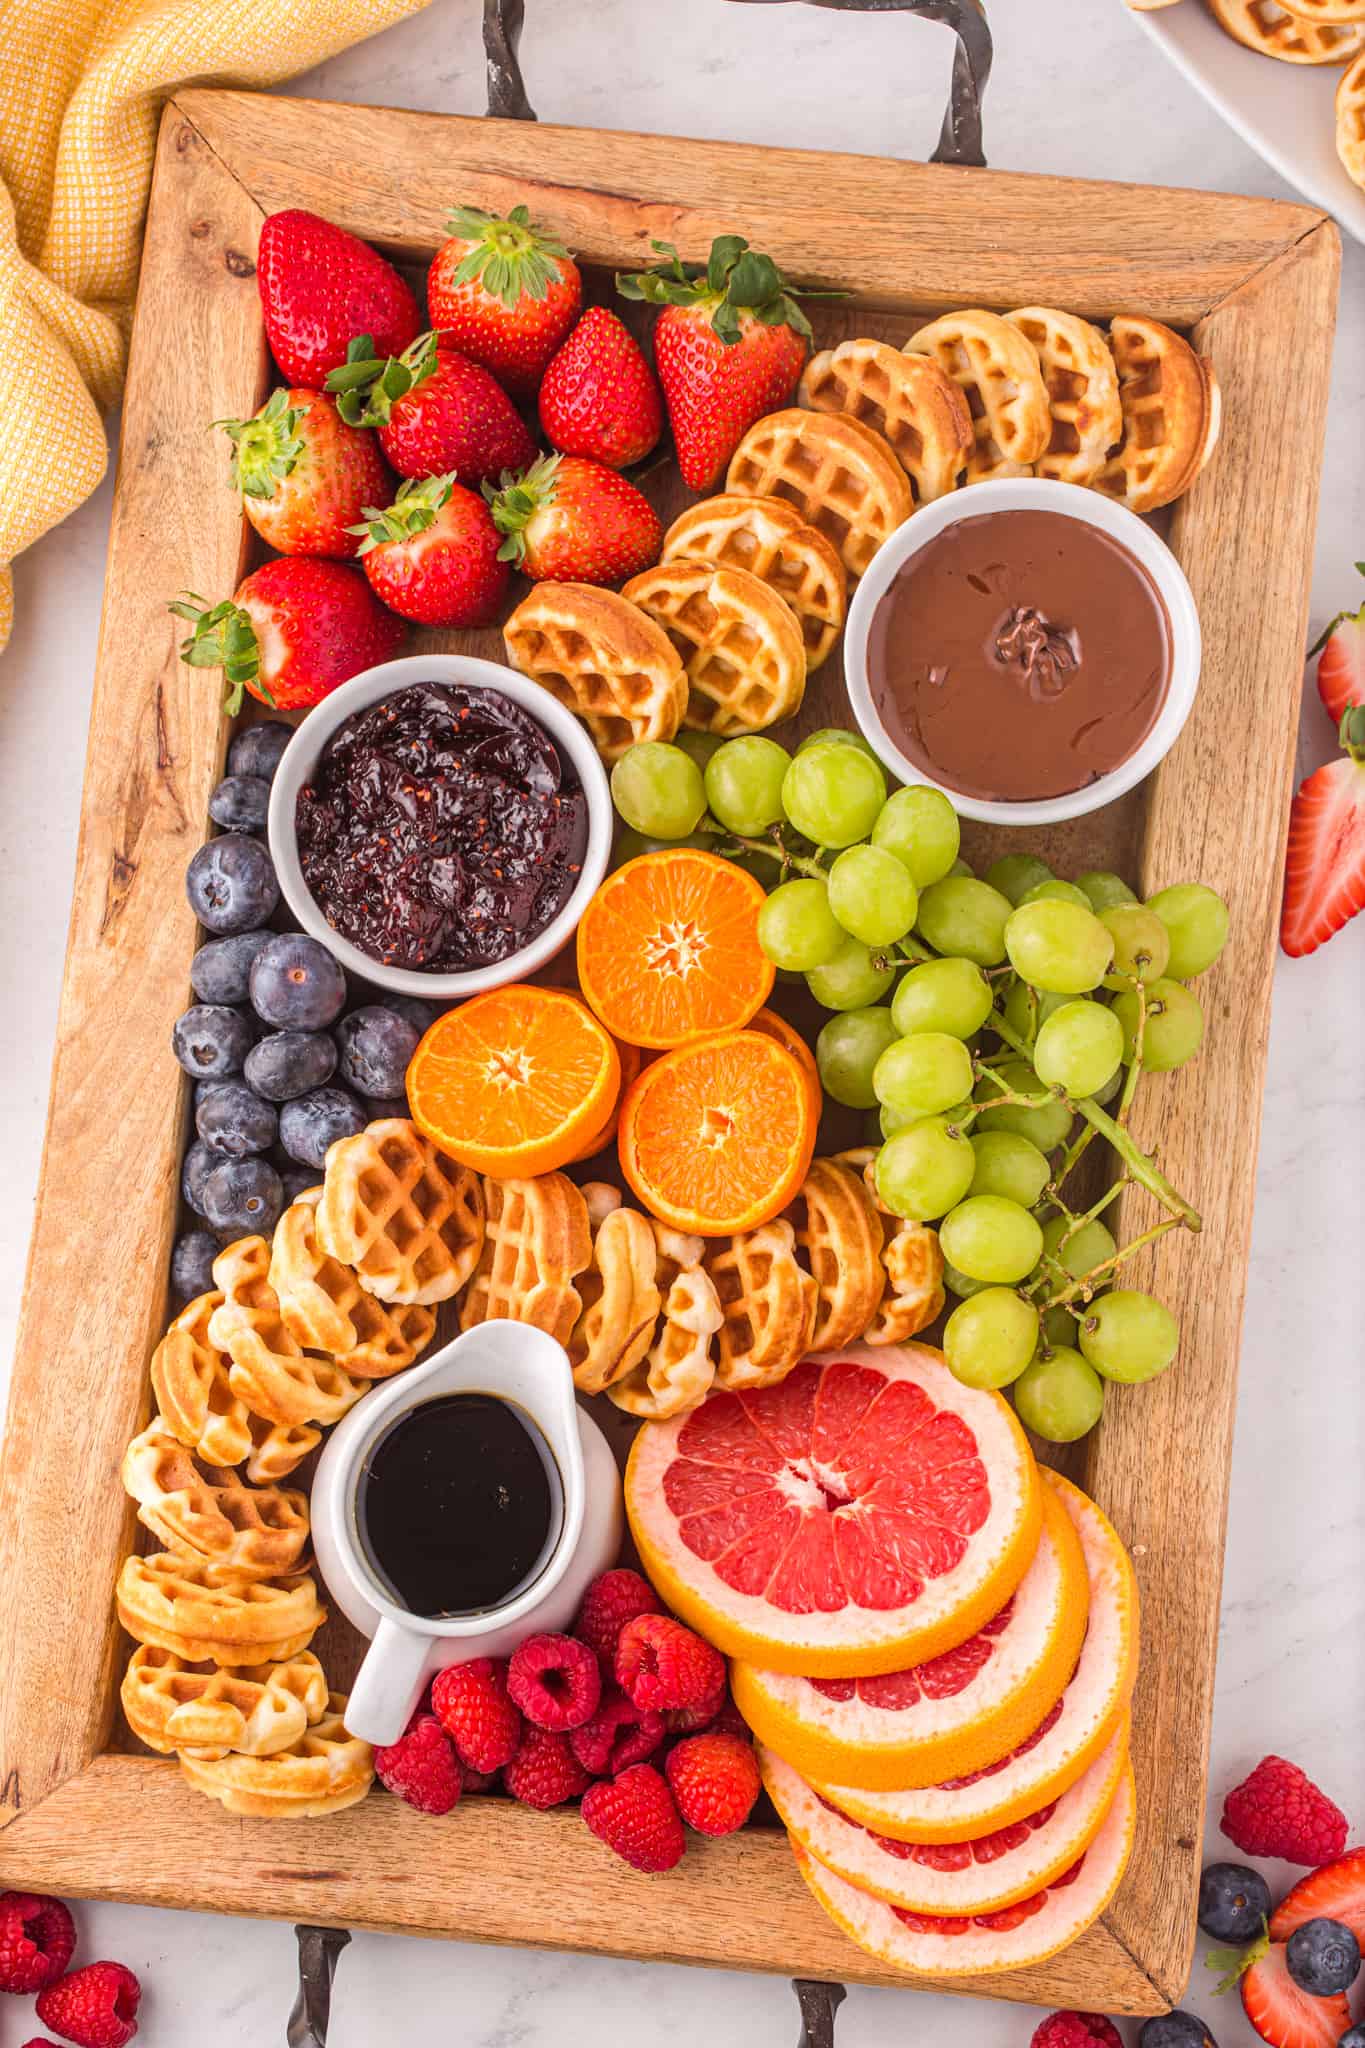 A colorful array of breakfast foods including waffles, fresh fruit, and assorted spreads displayed on a wooden board.